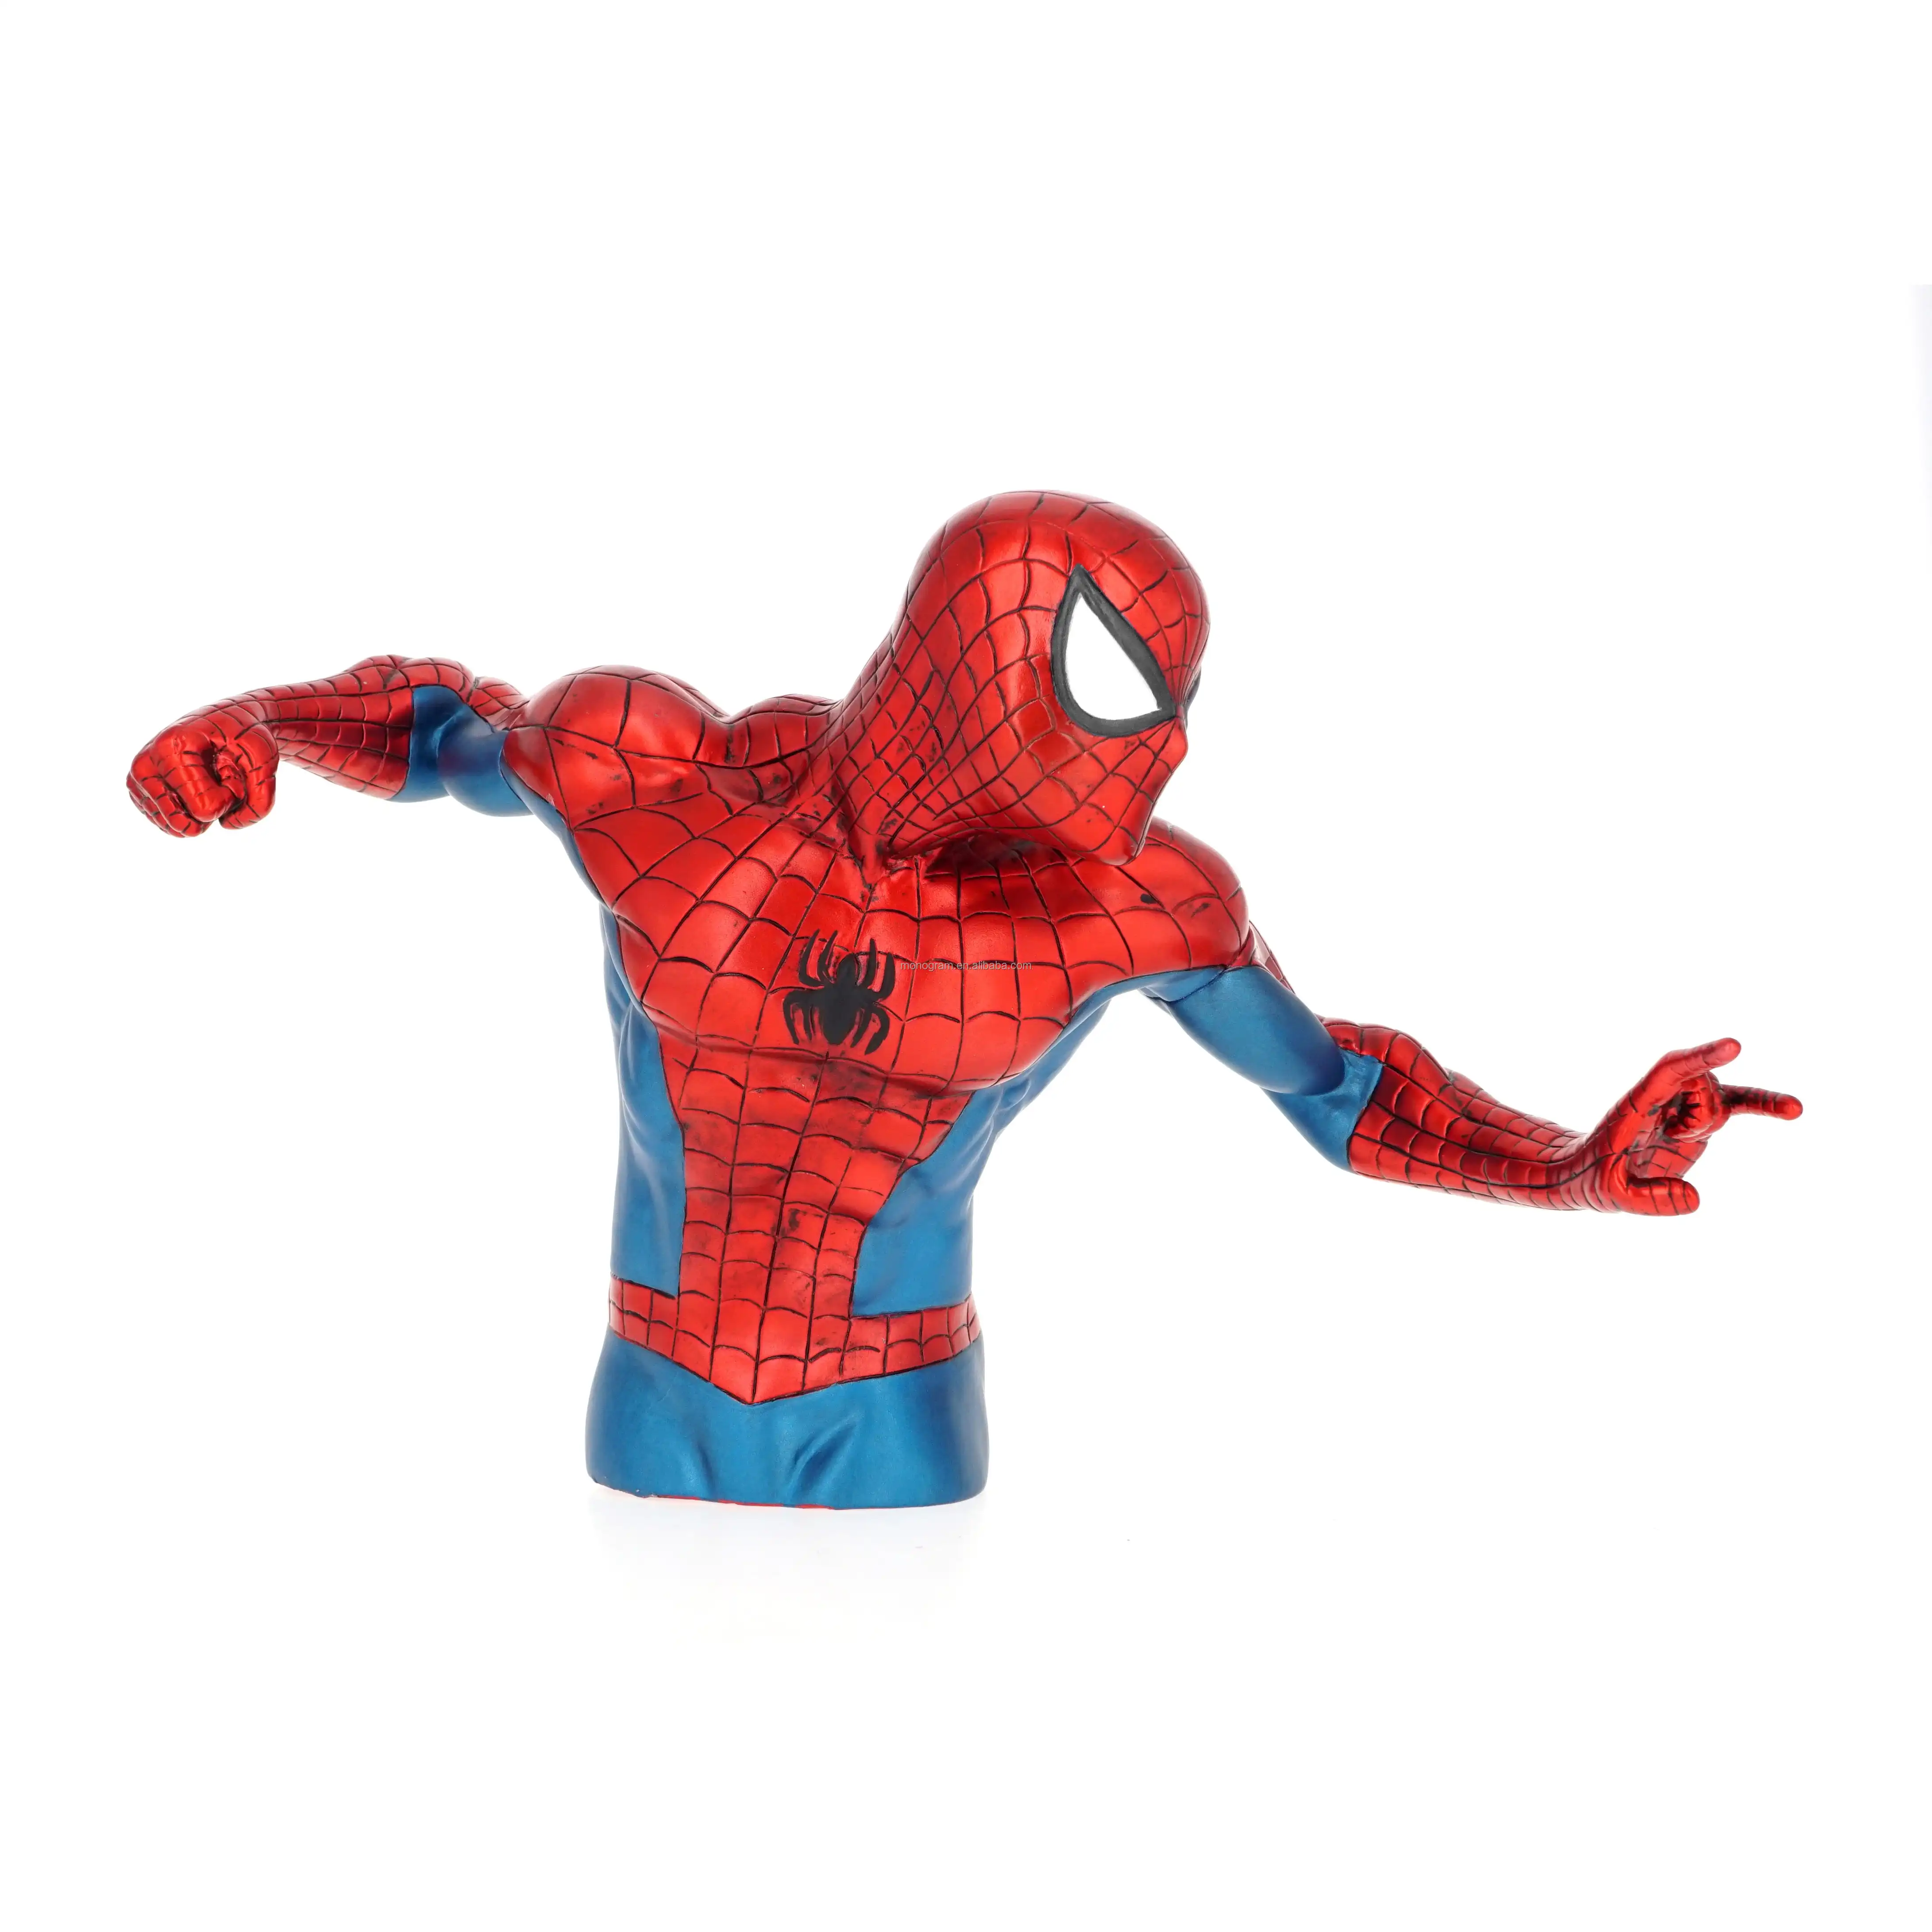 NEW COLLECTION CREATIVE UNBREAKABLE CUTE MARVEL HOT PRODUCT SPIDER-MAN MONEY ATM BANK